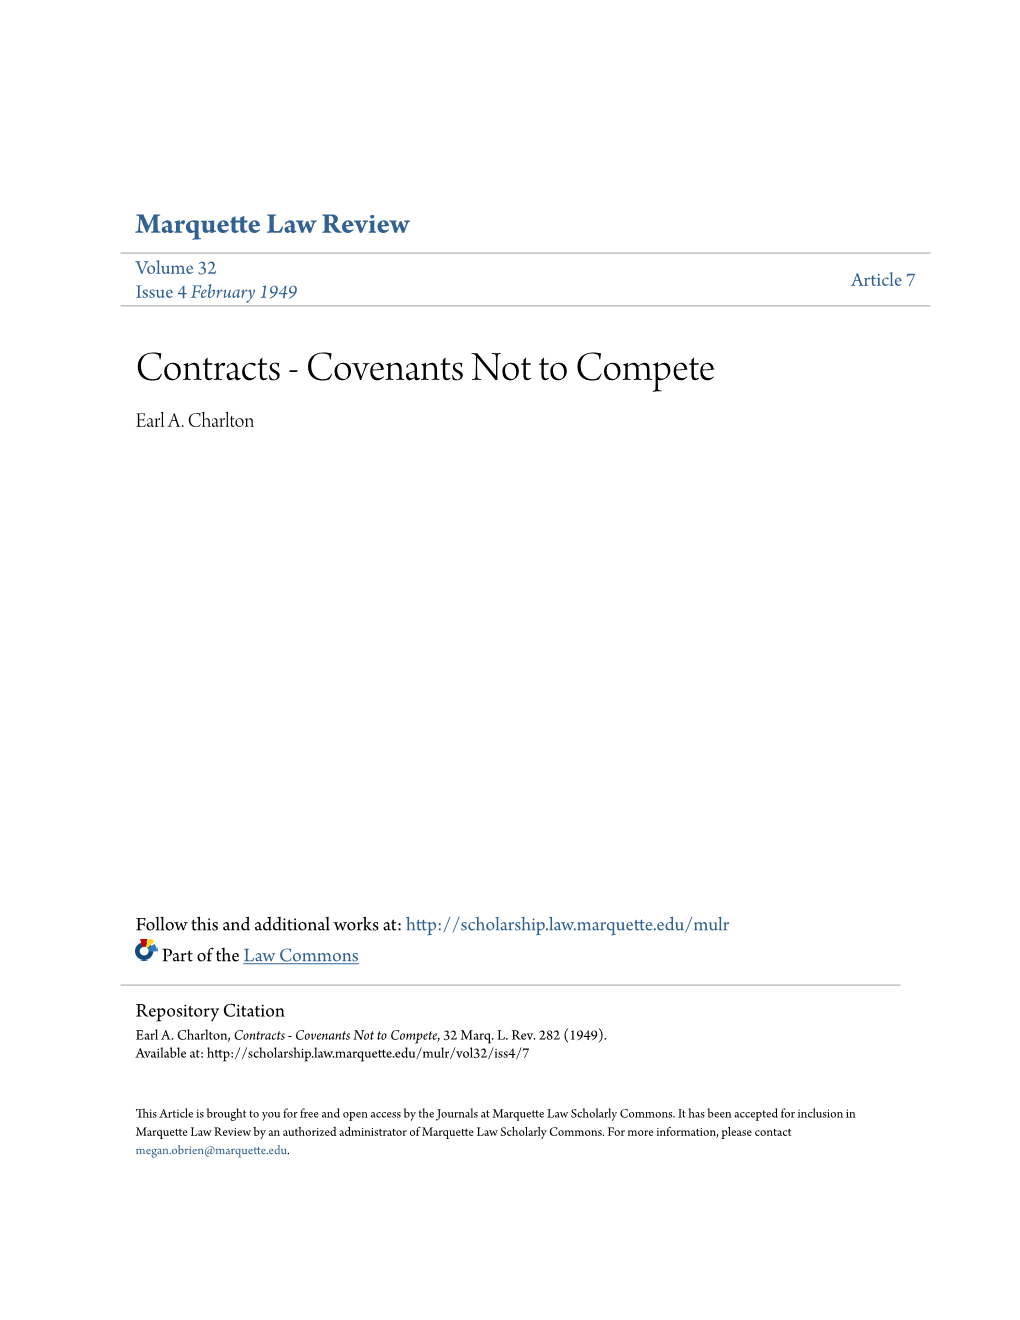 Contracts - Covenants Not to Compete Earl A